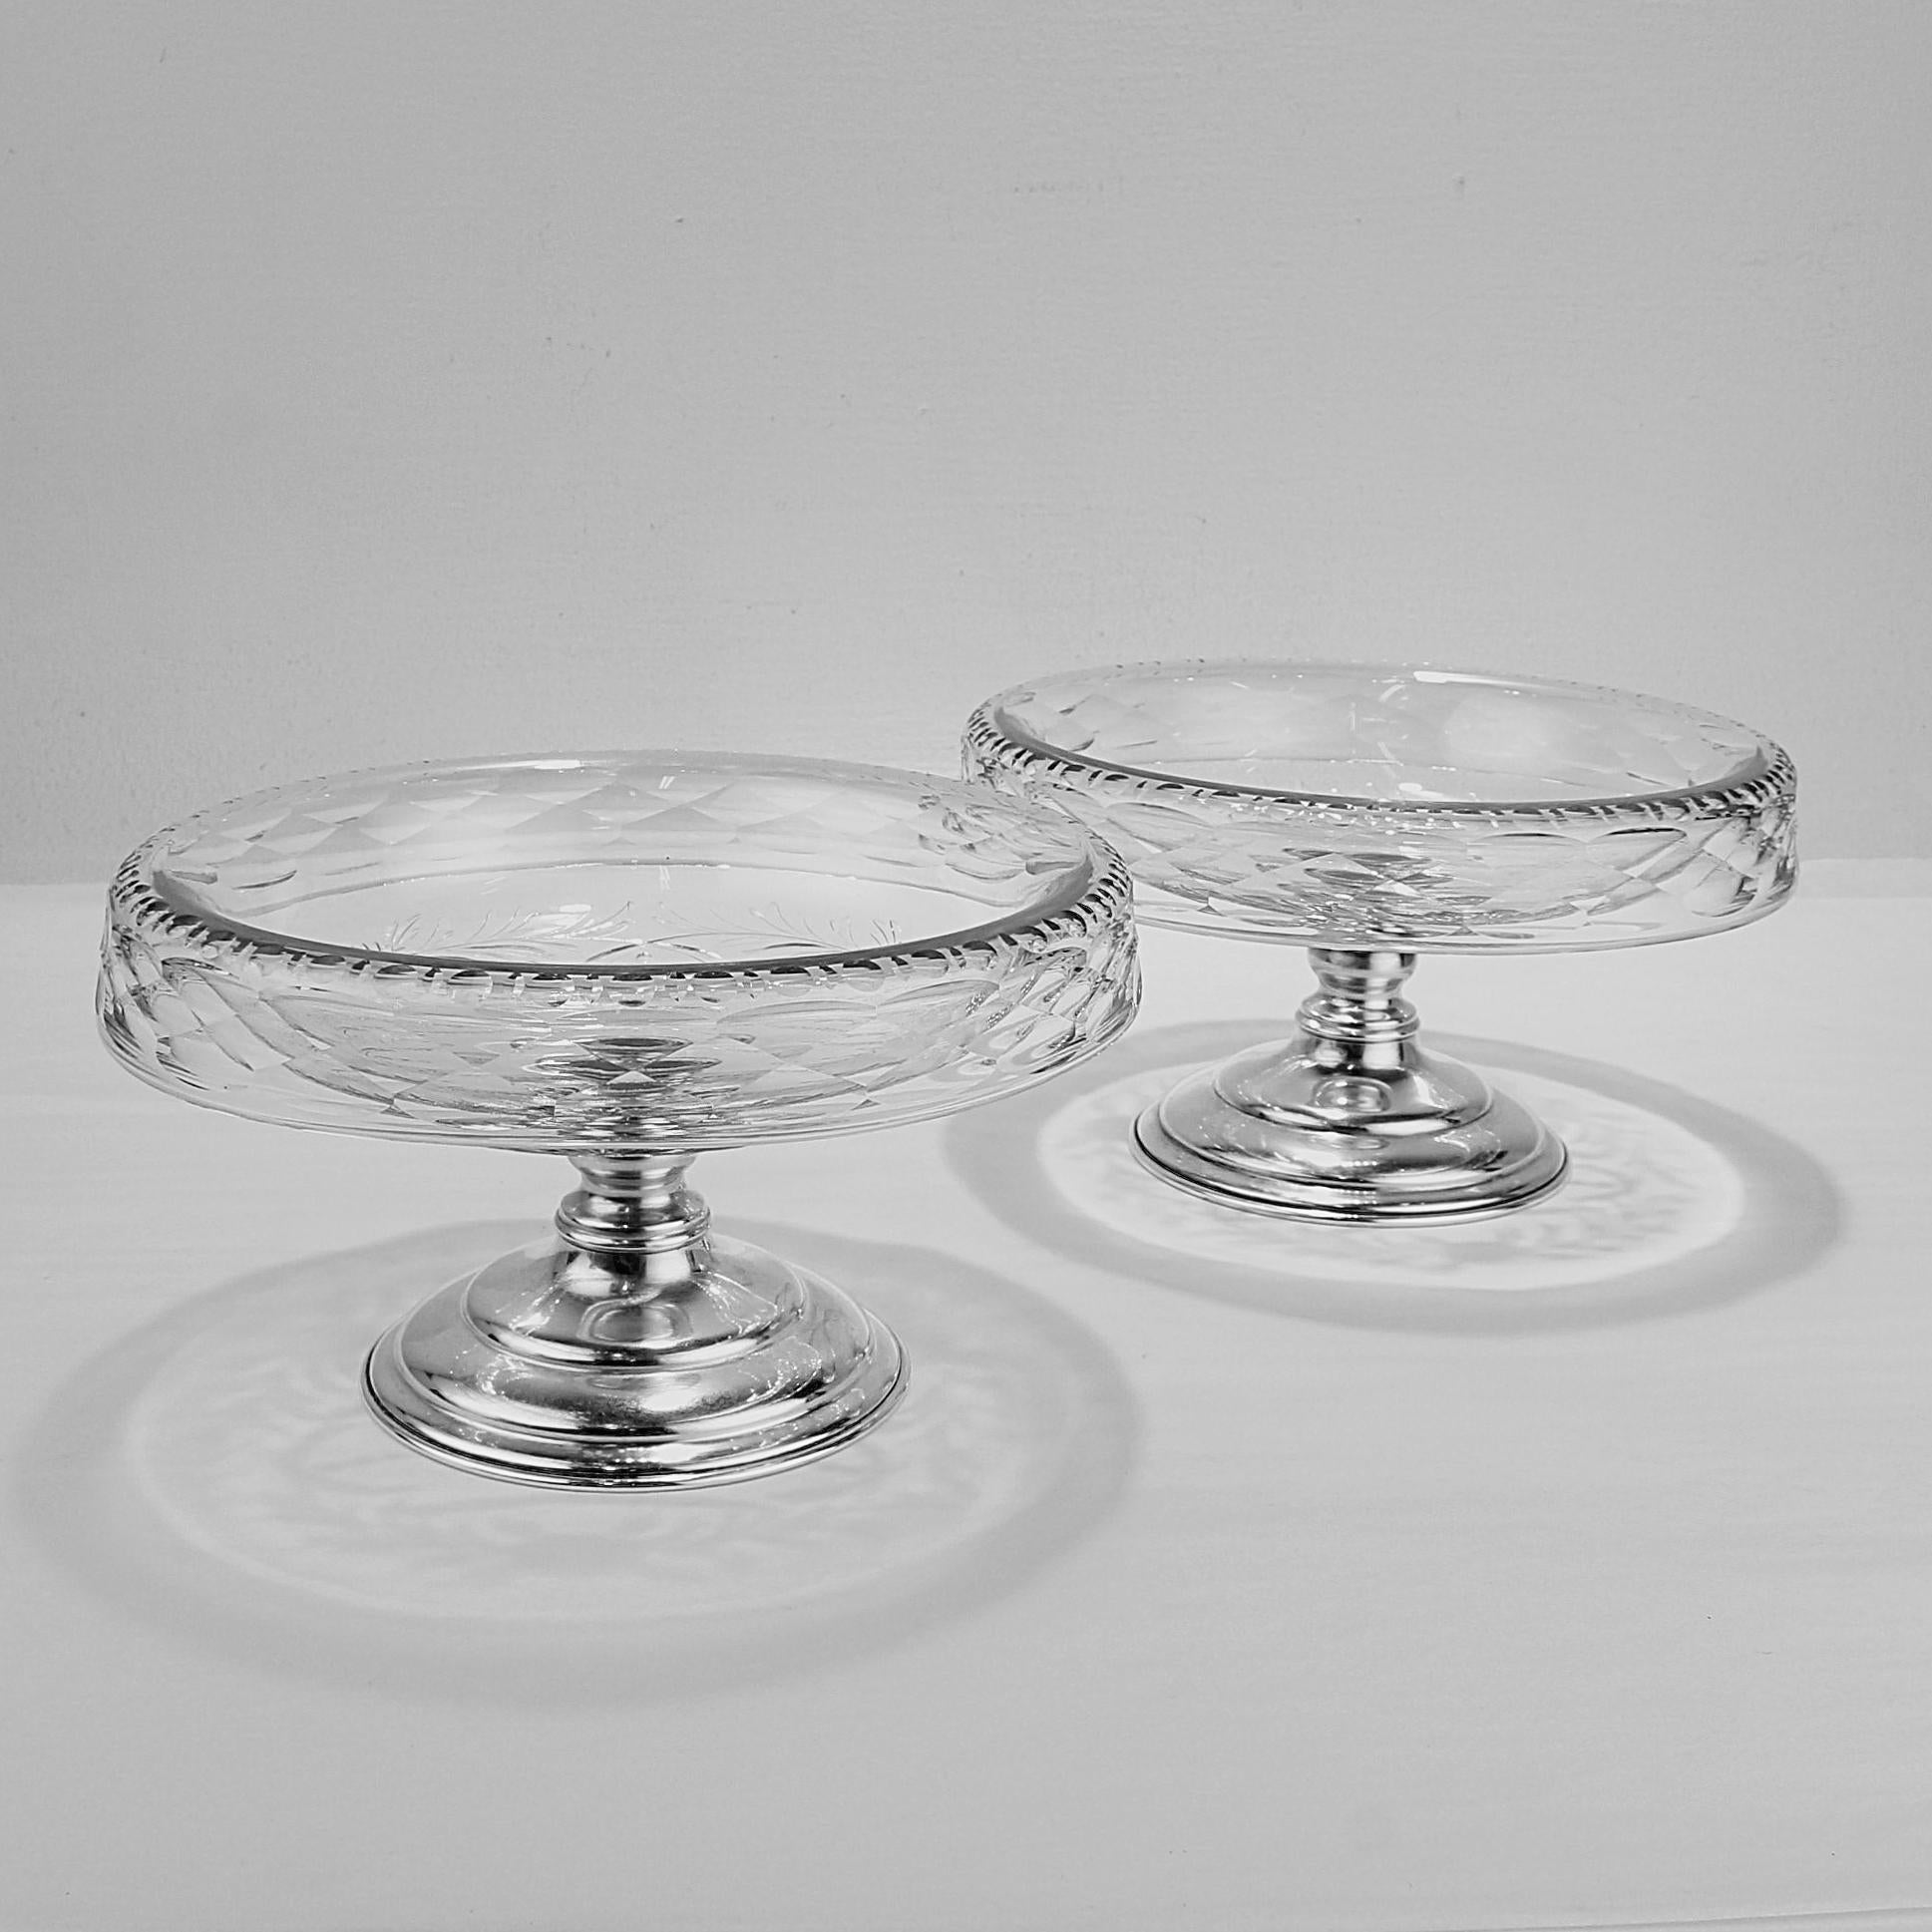 A fine pair of Hawkes footed bowls or compotes.

Model no. S411

With cut glass tops and sterling silver bases. 

Engraved with geometric and floral decoration throughout.
 
Simply wonderful footed bowls!

Date:
Early 20th